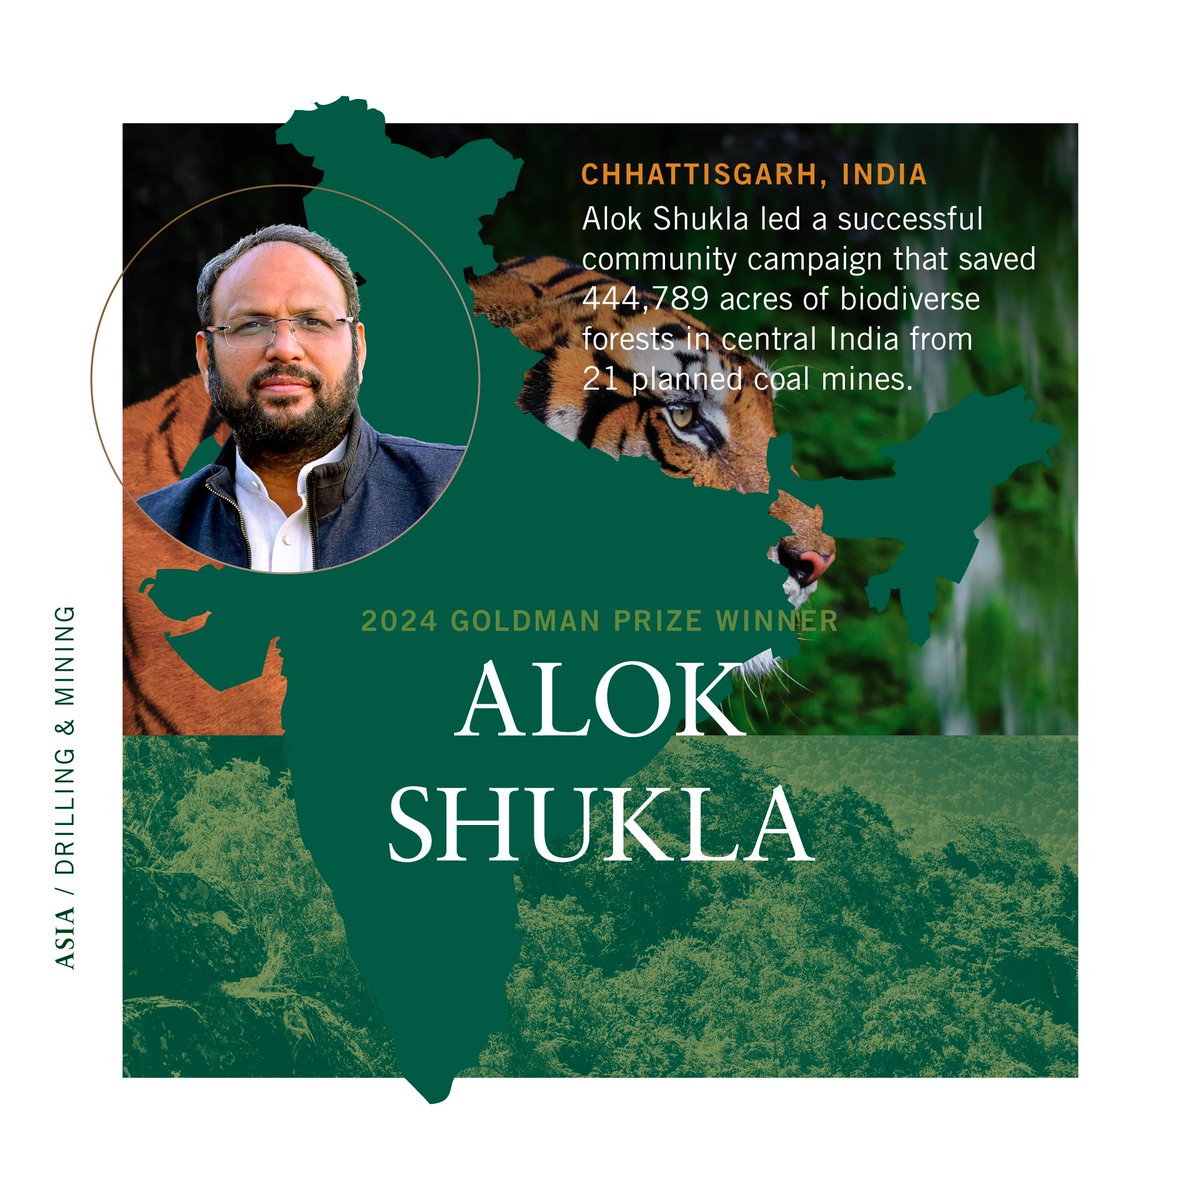 Alok Shukla (@alokshuklacg) and his coalition led a successful community campaign that saved 444,789 acres of biodiverse forests in central India from 21 planned coal mines. #GoldmanPrize 🌎🏆 👉 Learn more: bit.ly/4aUXMKq